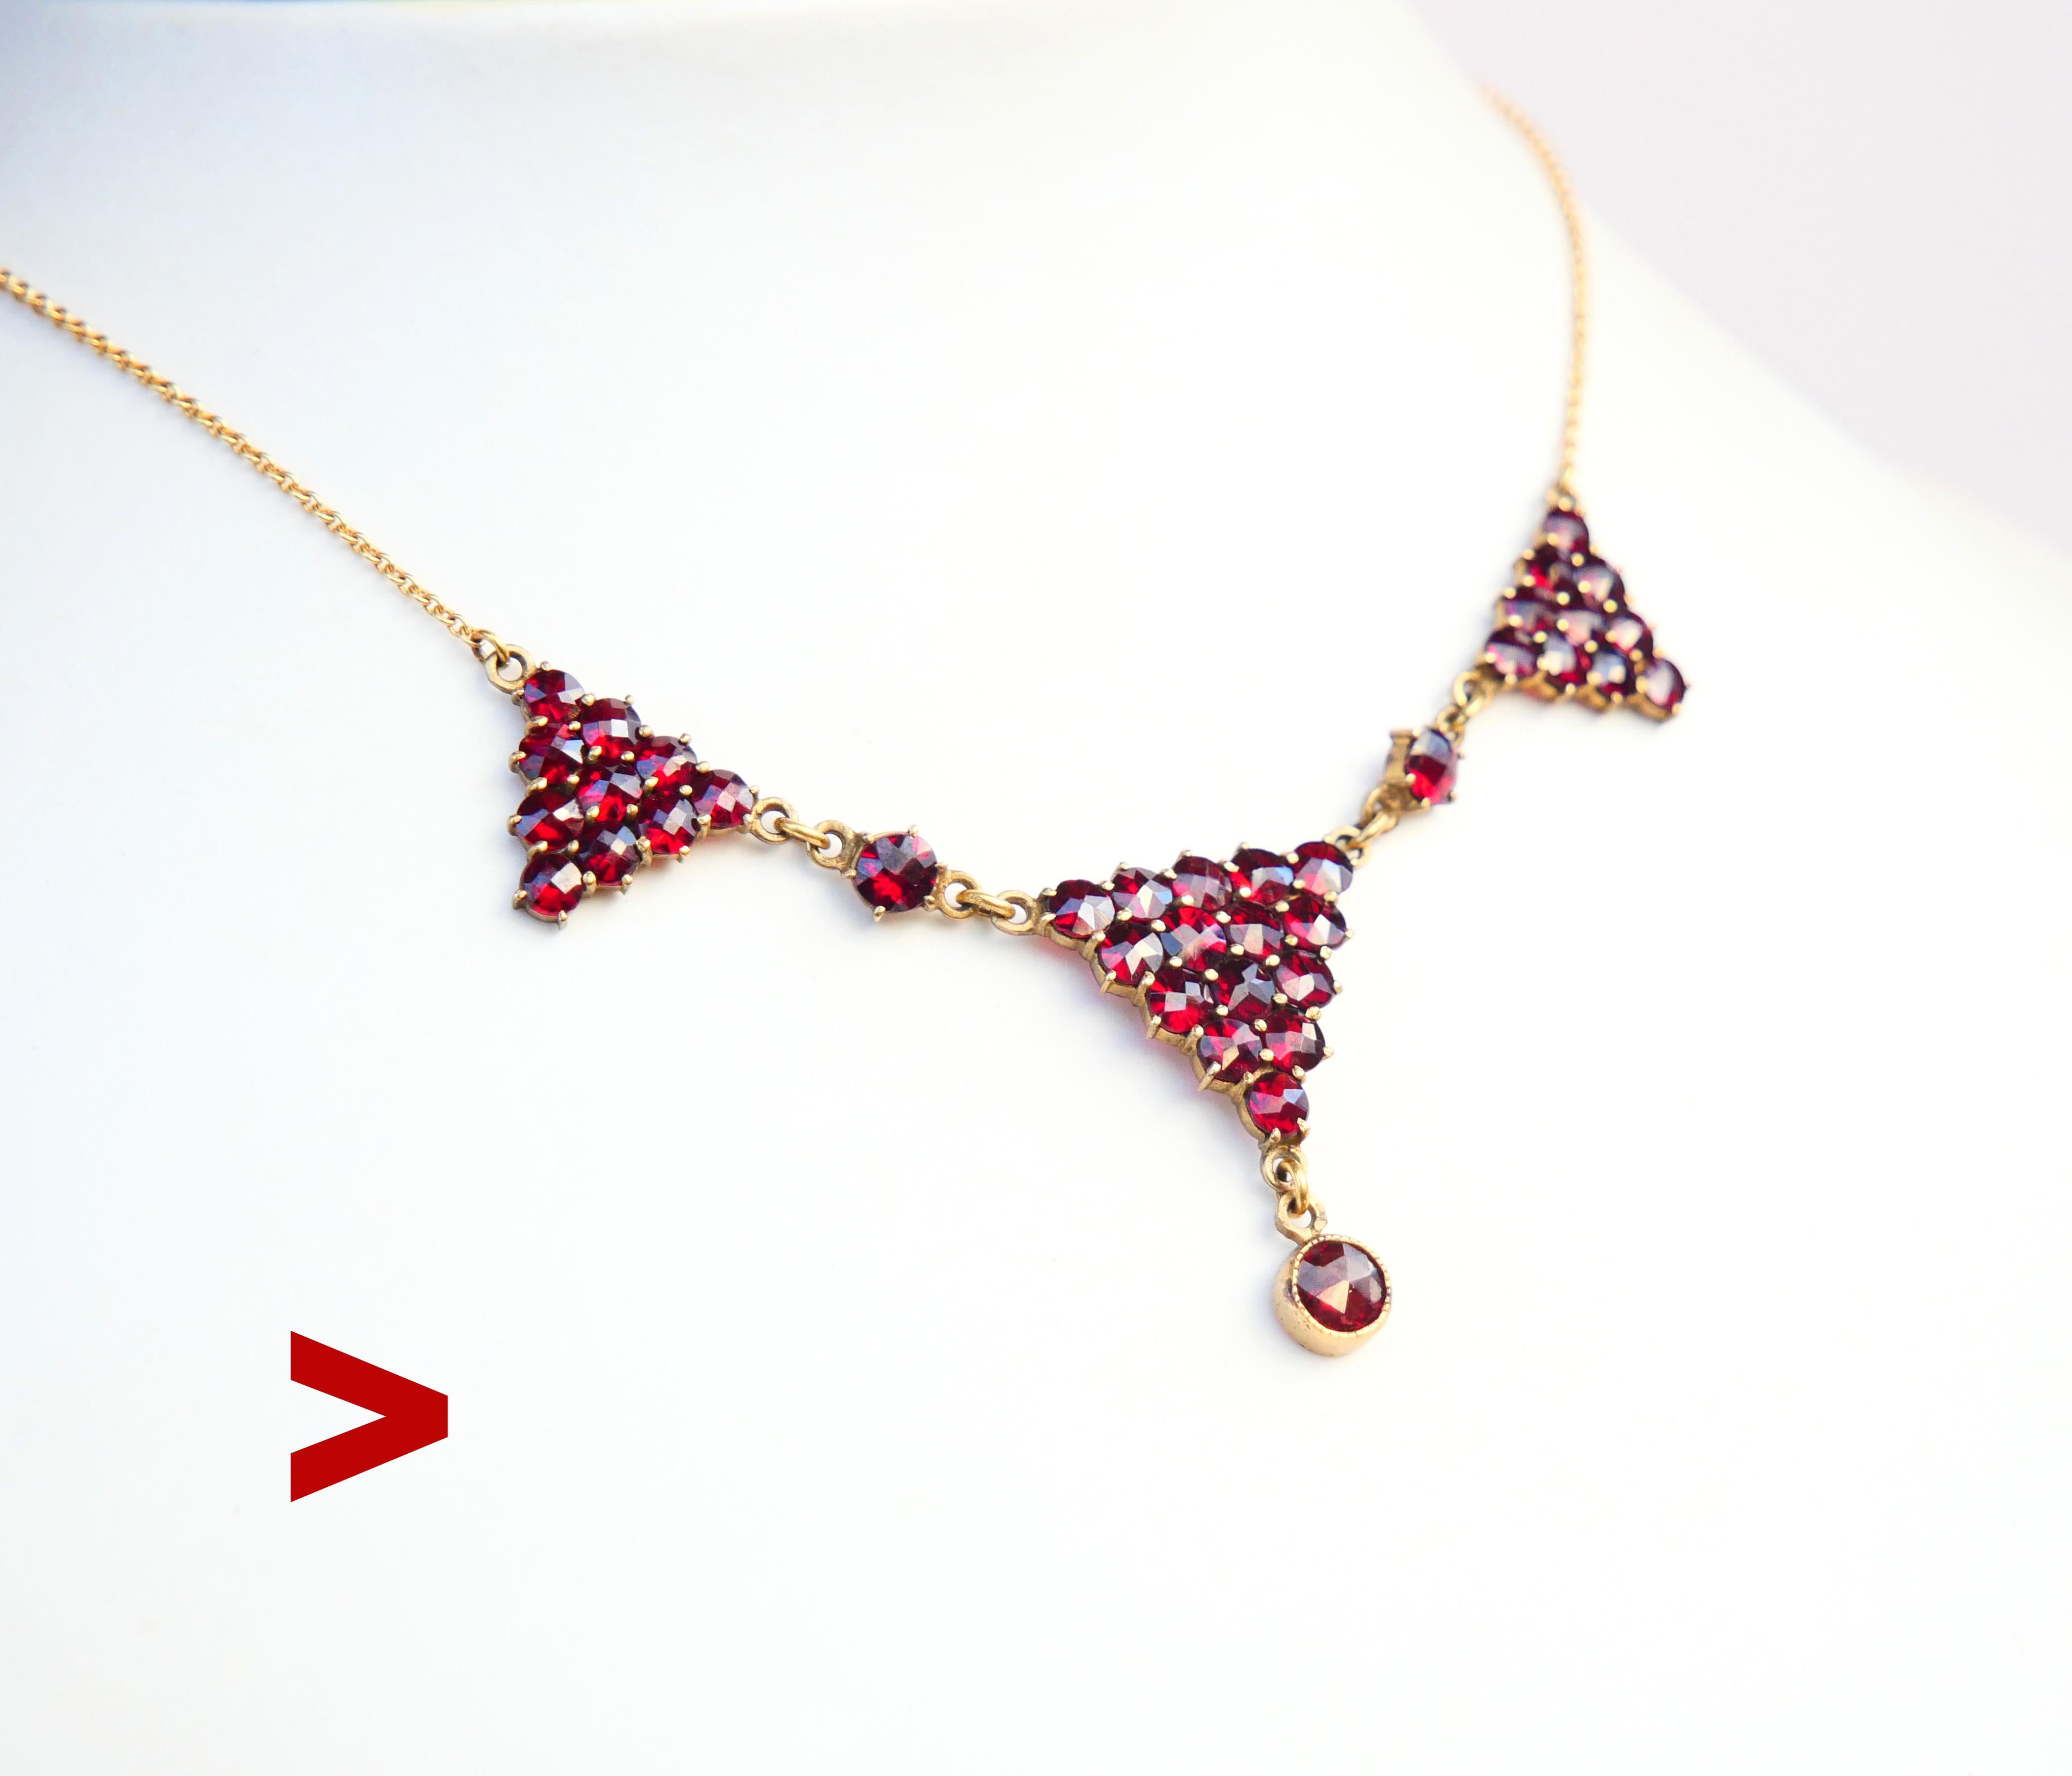 Art Deco period ca. 1930s Bohemian Garnet Necklace featuring clusters in Gilt Silver and chain in solid 18K Yellow Gold with C-lock.

No markings on the pendant. Chain hallmarked 18K.

I counted 37 rose-cut red Bohemian Garnet stones.

The length of